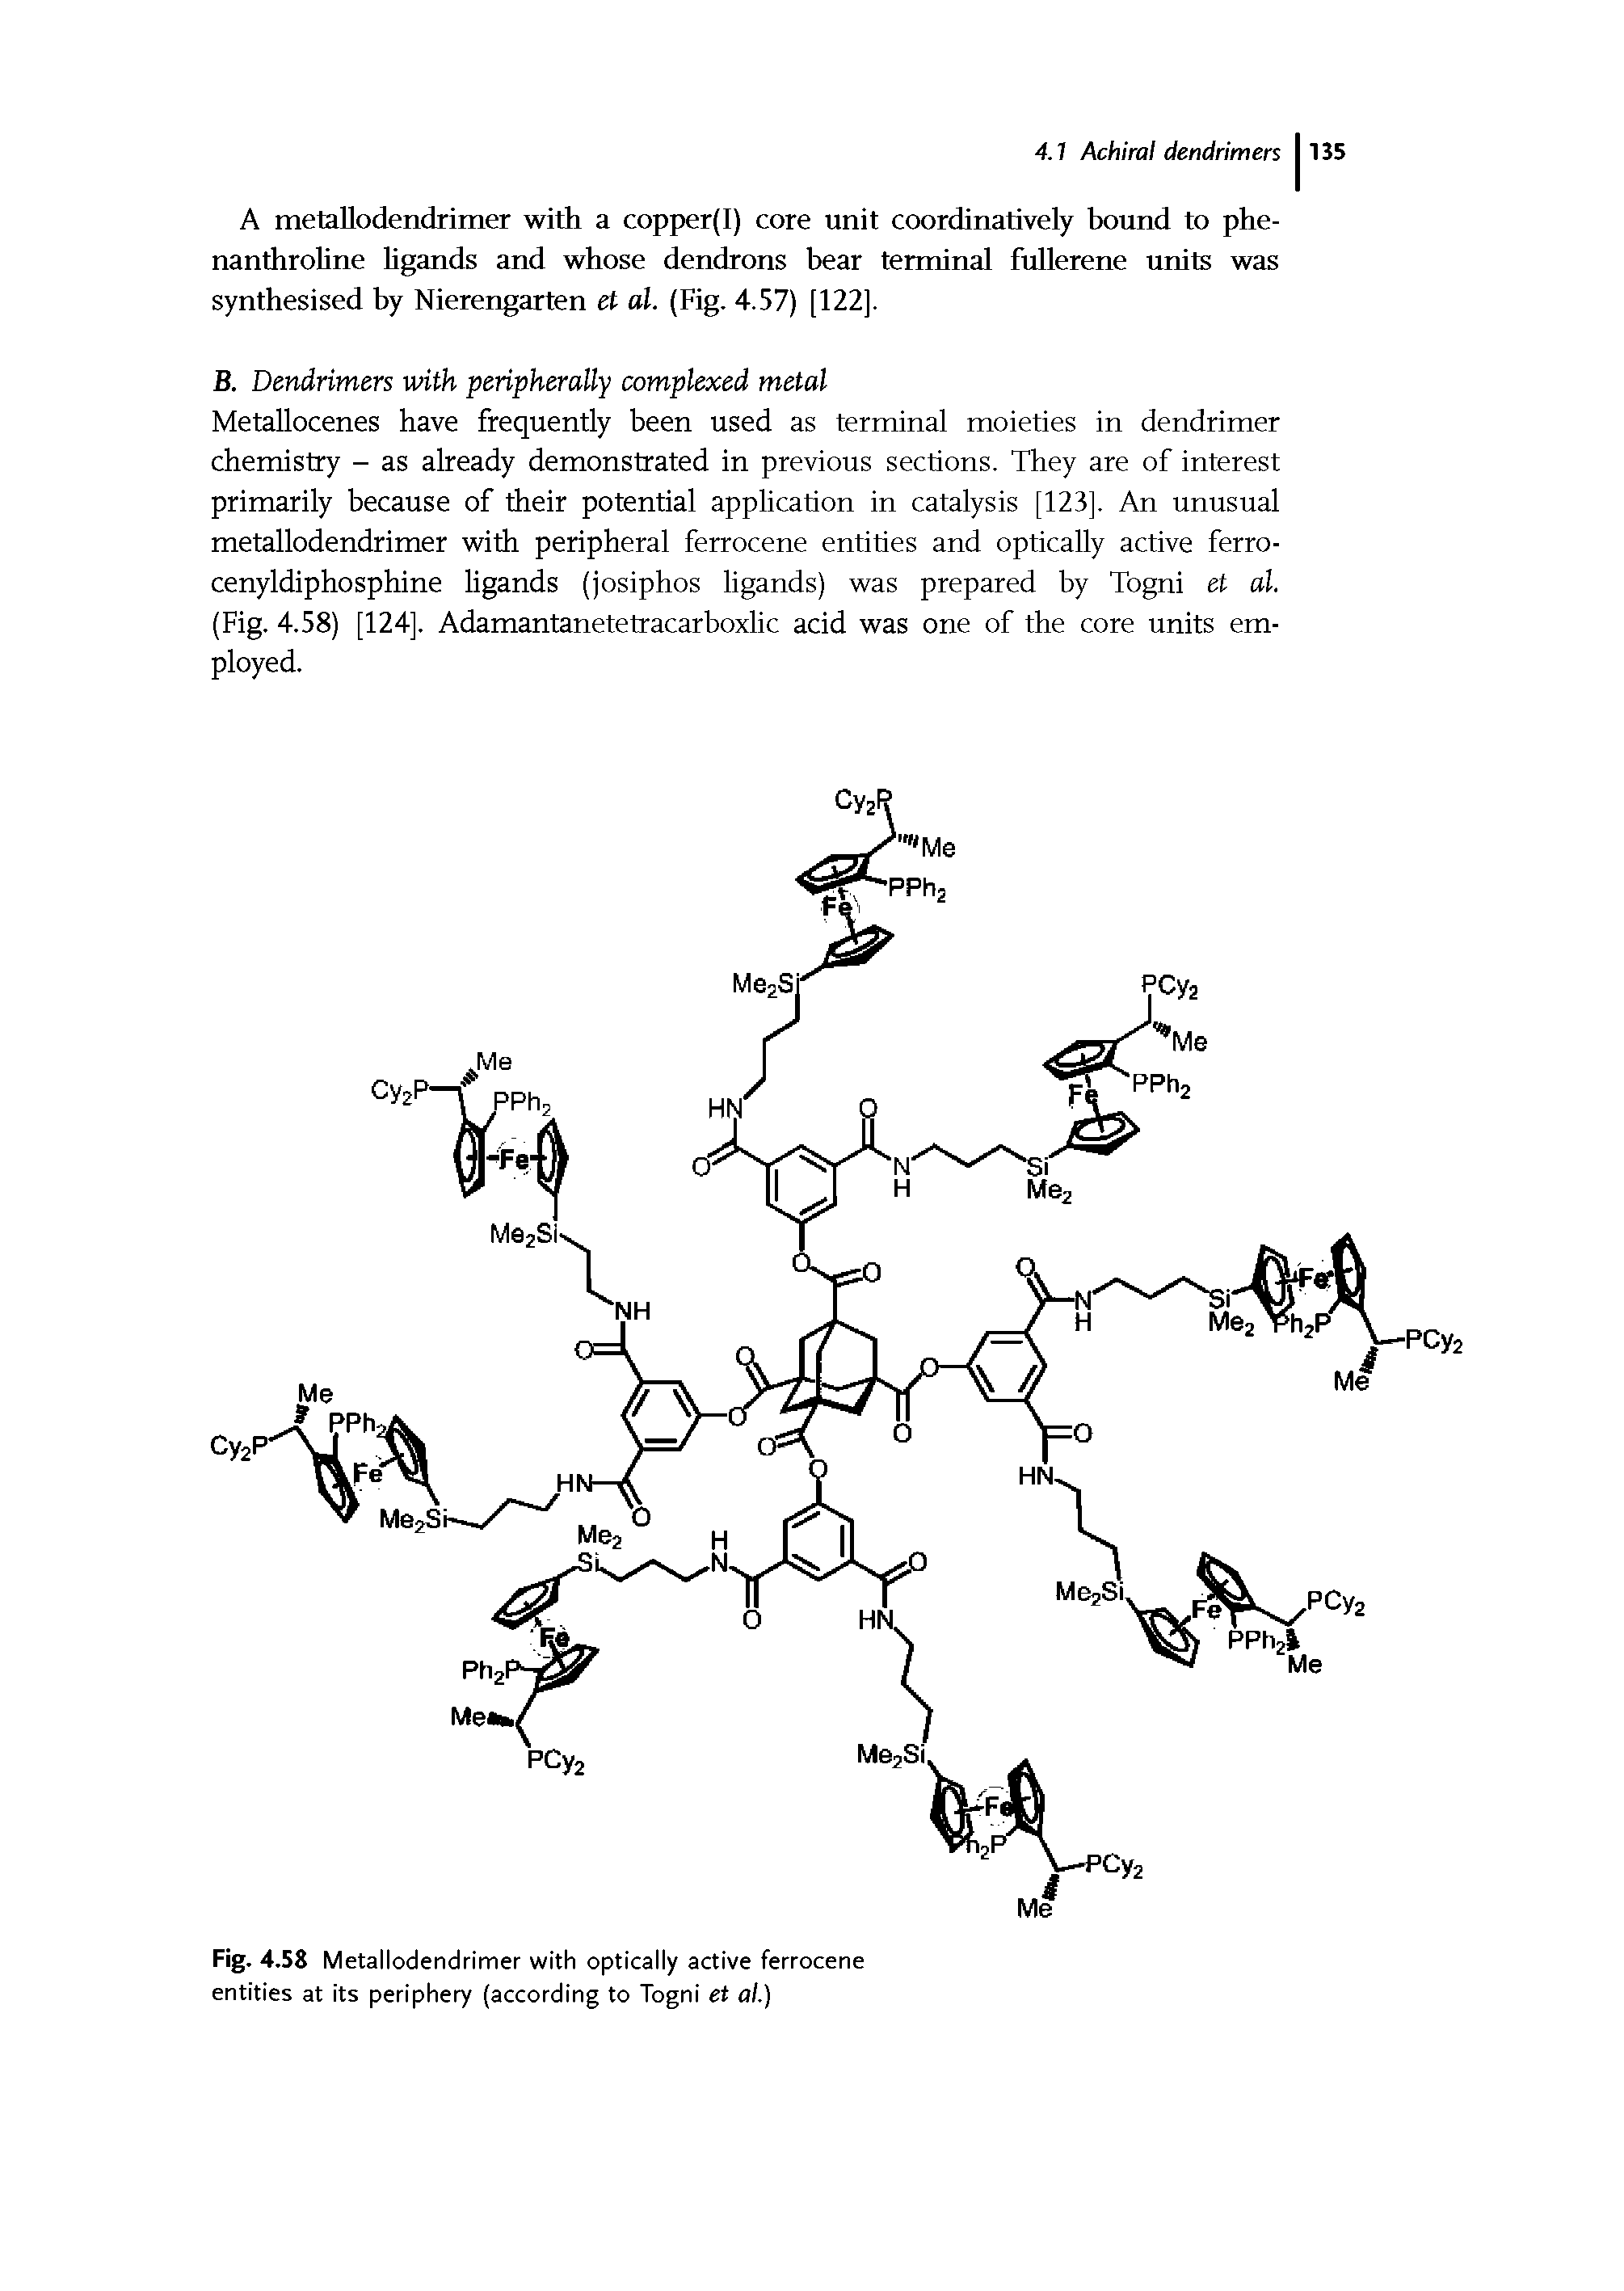 Fig. 4.58 Metallodendrimer with optically active ferrocene entities at its periphery (according to Togni et al.)...